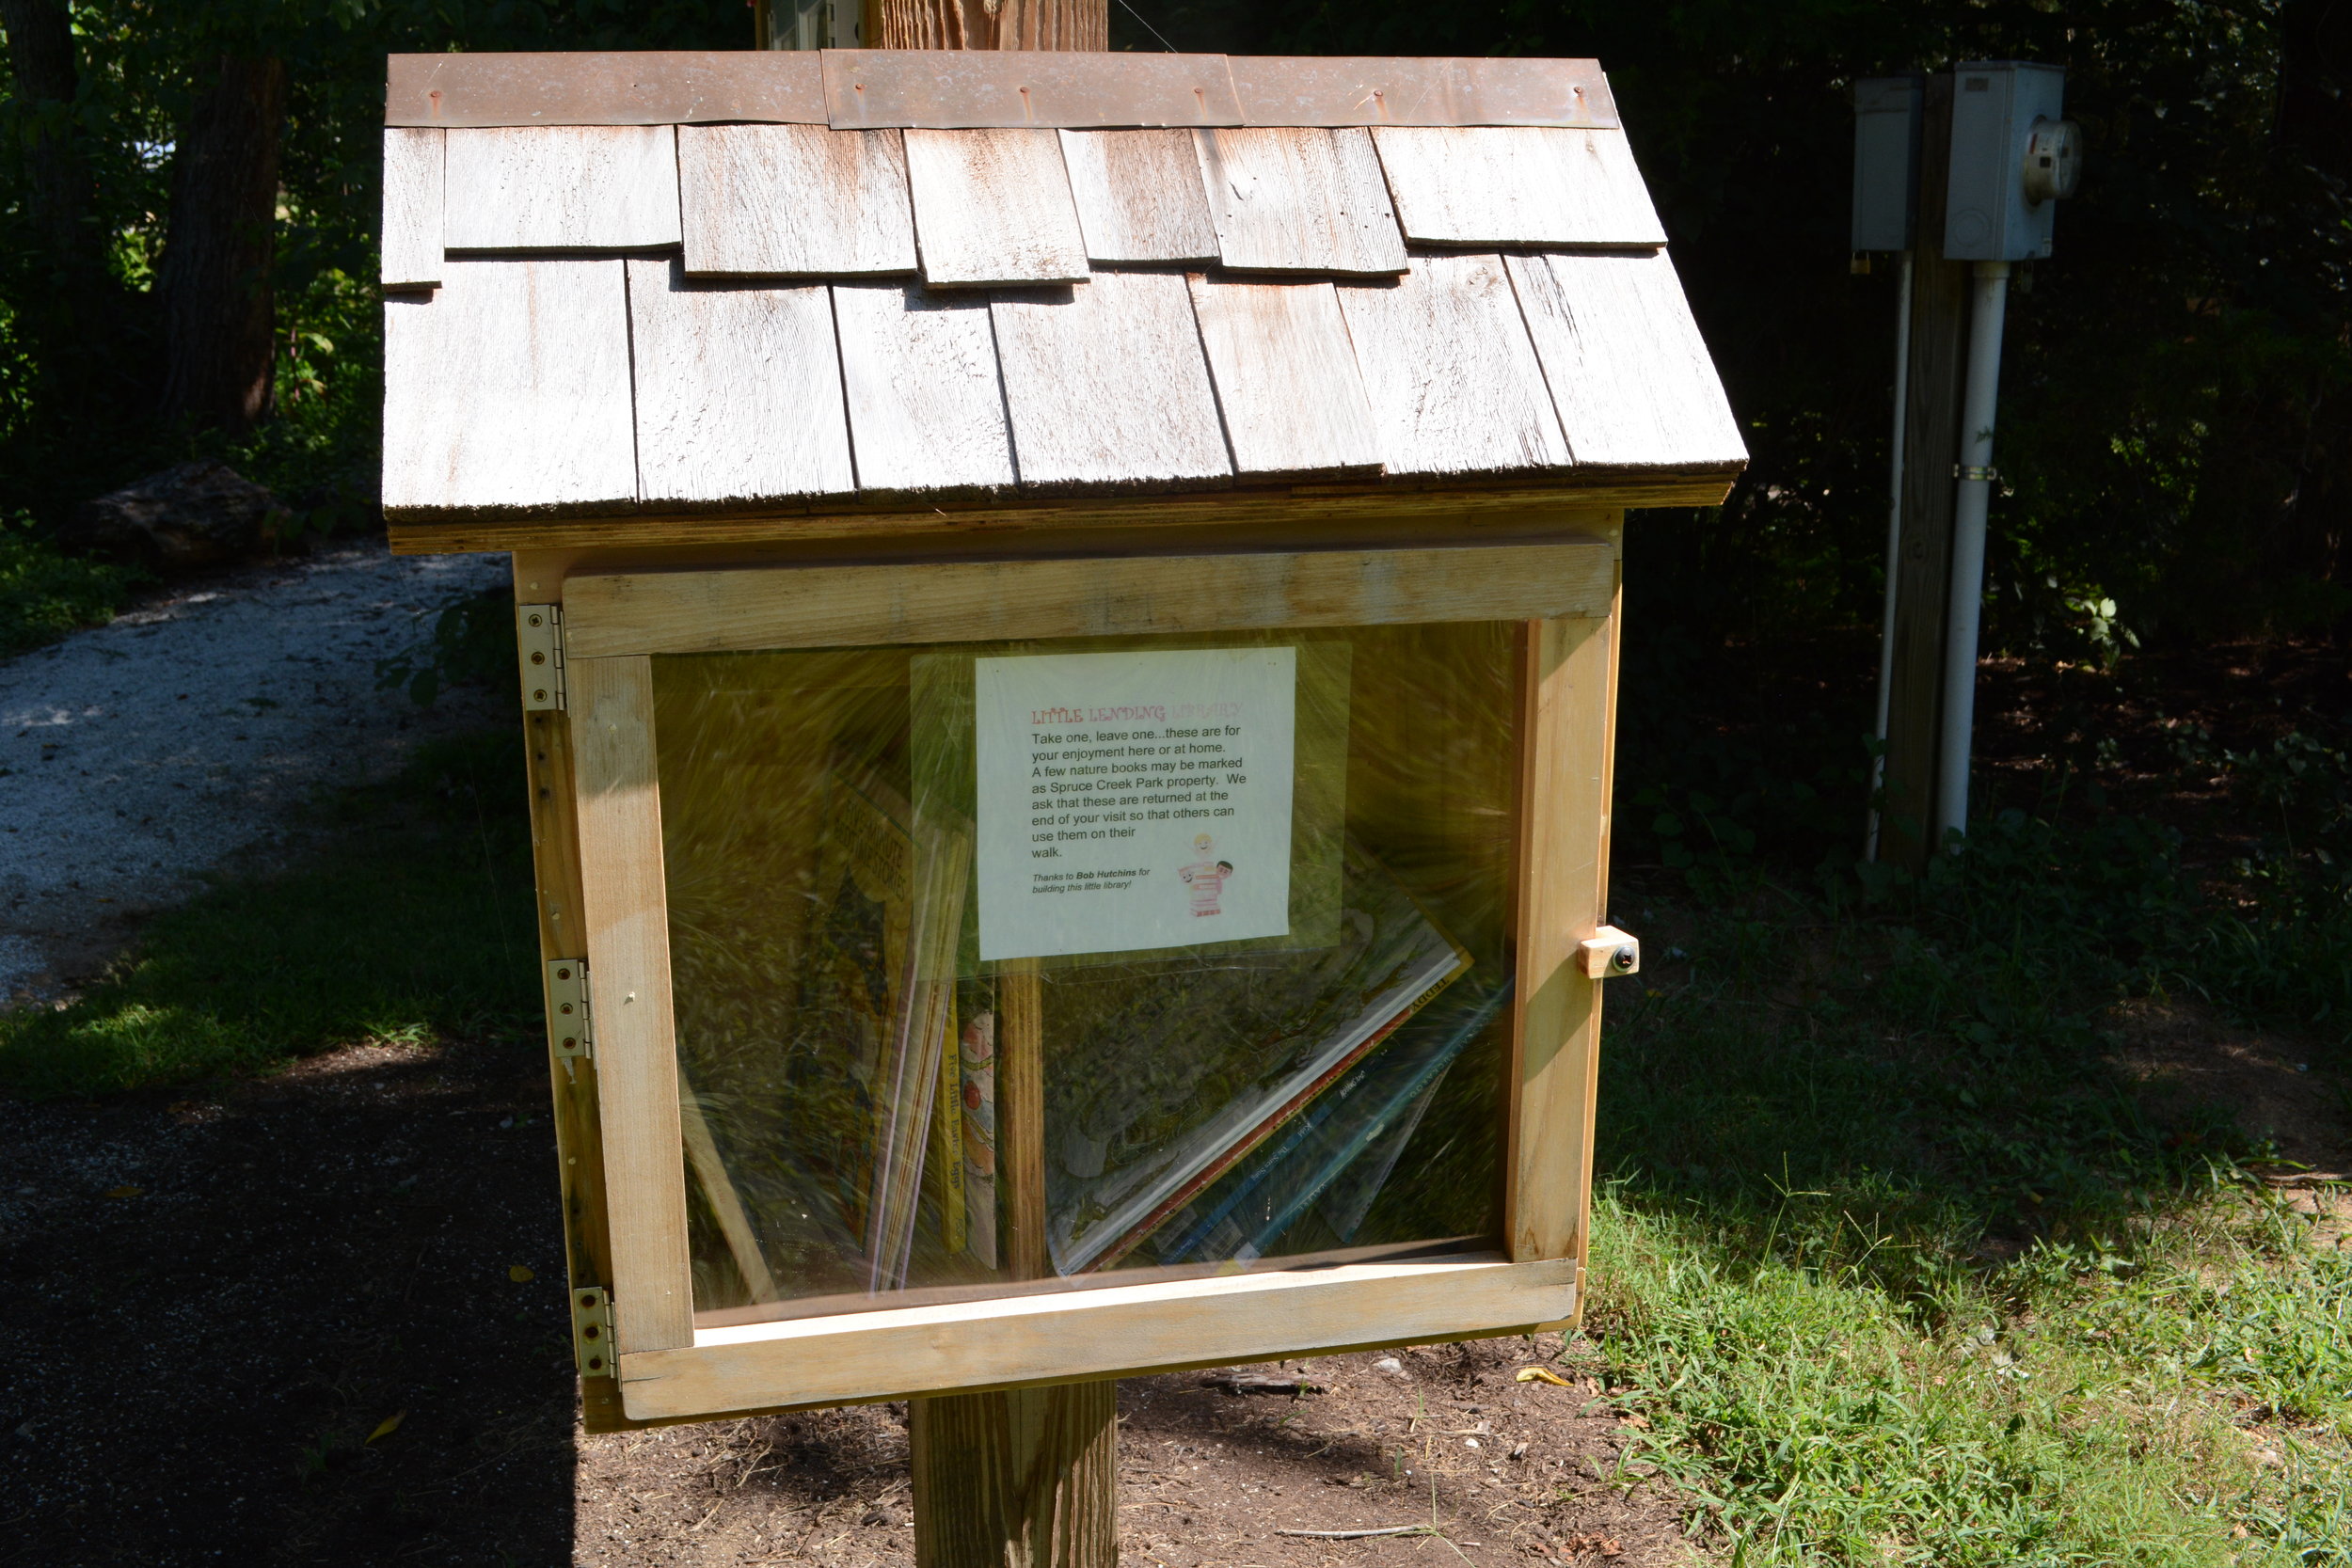 The park's take-a-book, give-a-book outdoor children's library is working well.